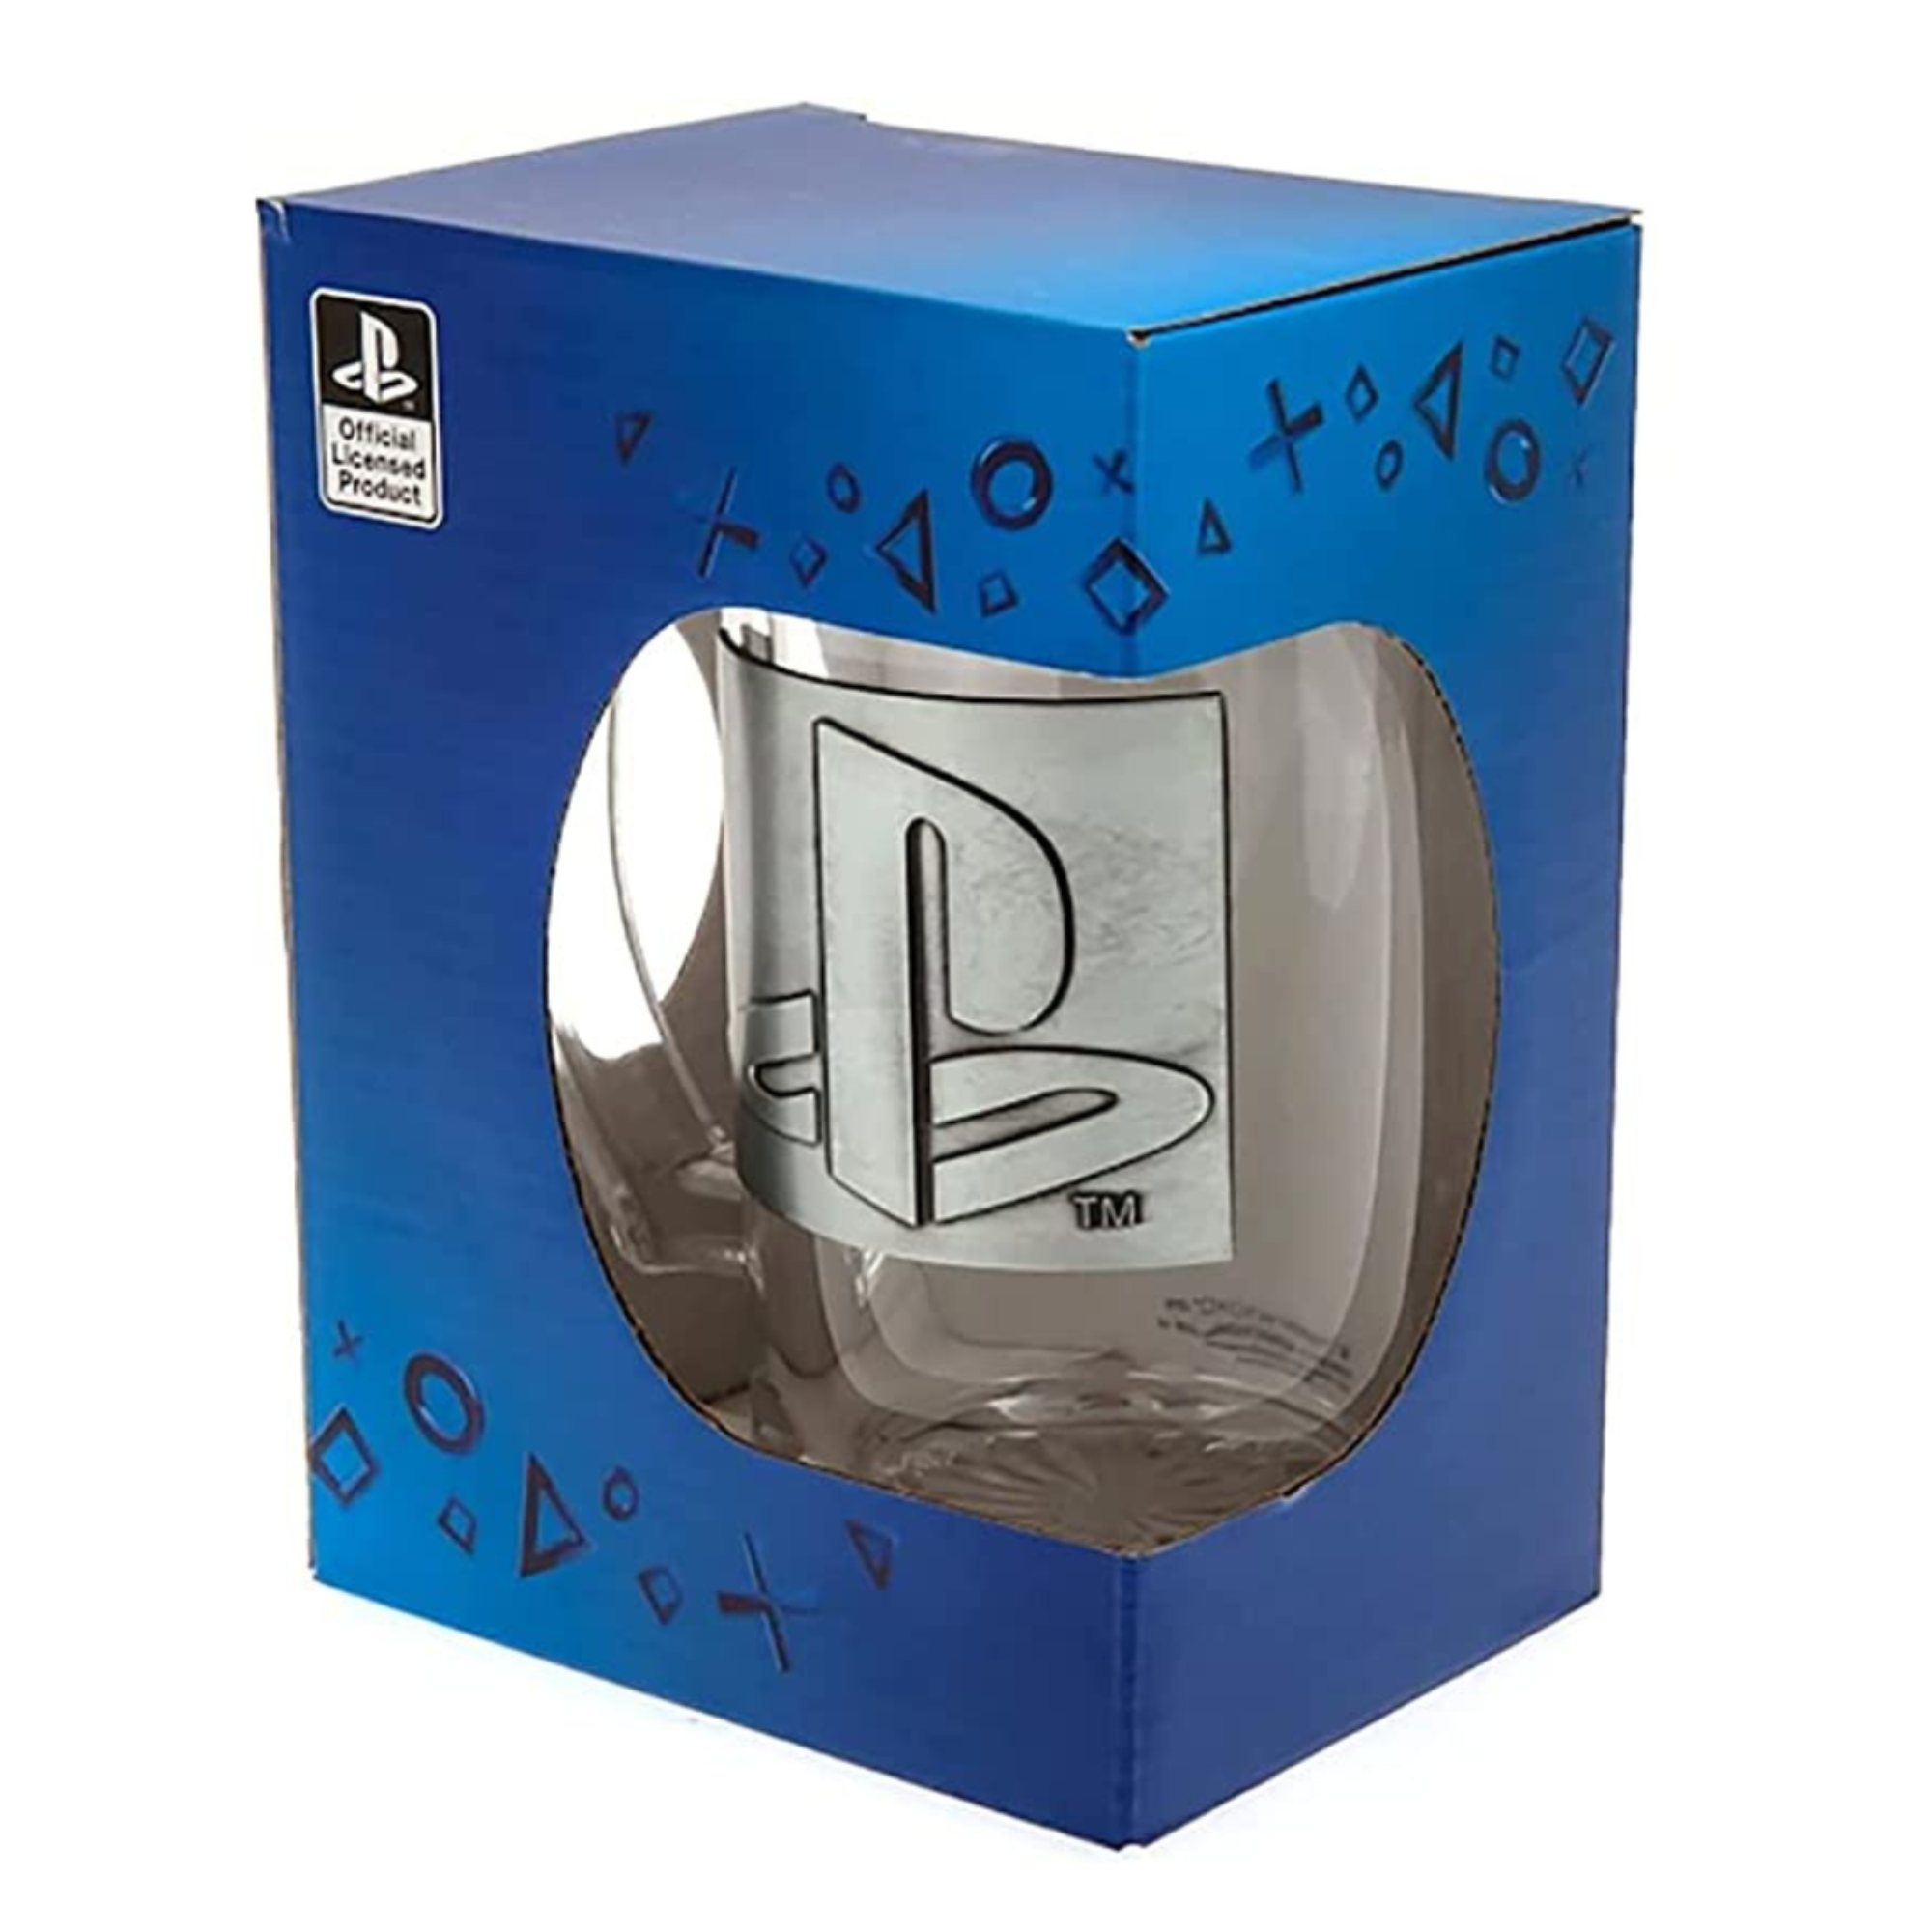 4 x Officially Licensed Playstation 500ml Glass Beer Drink Stein with Metal Logo Badge in Gift Box - Toptoys2u